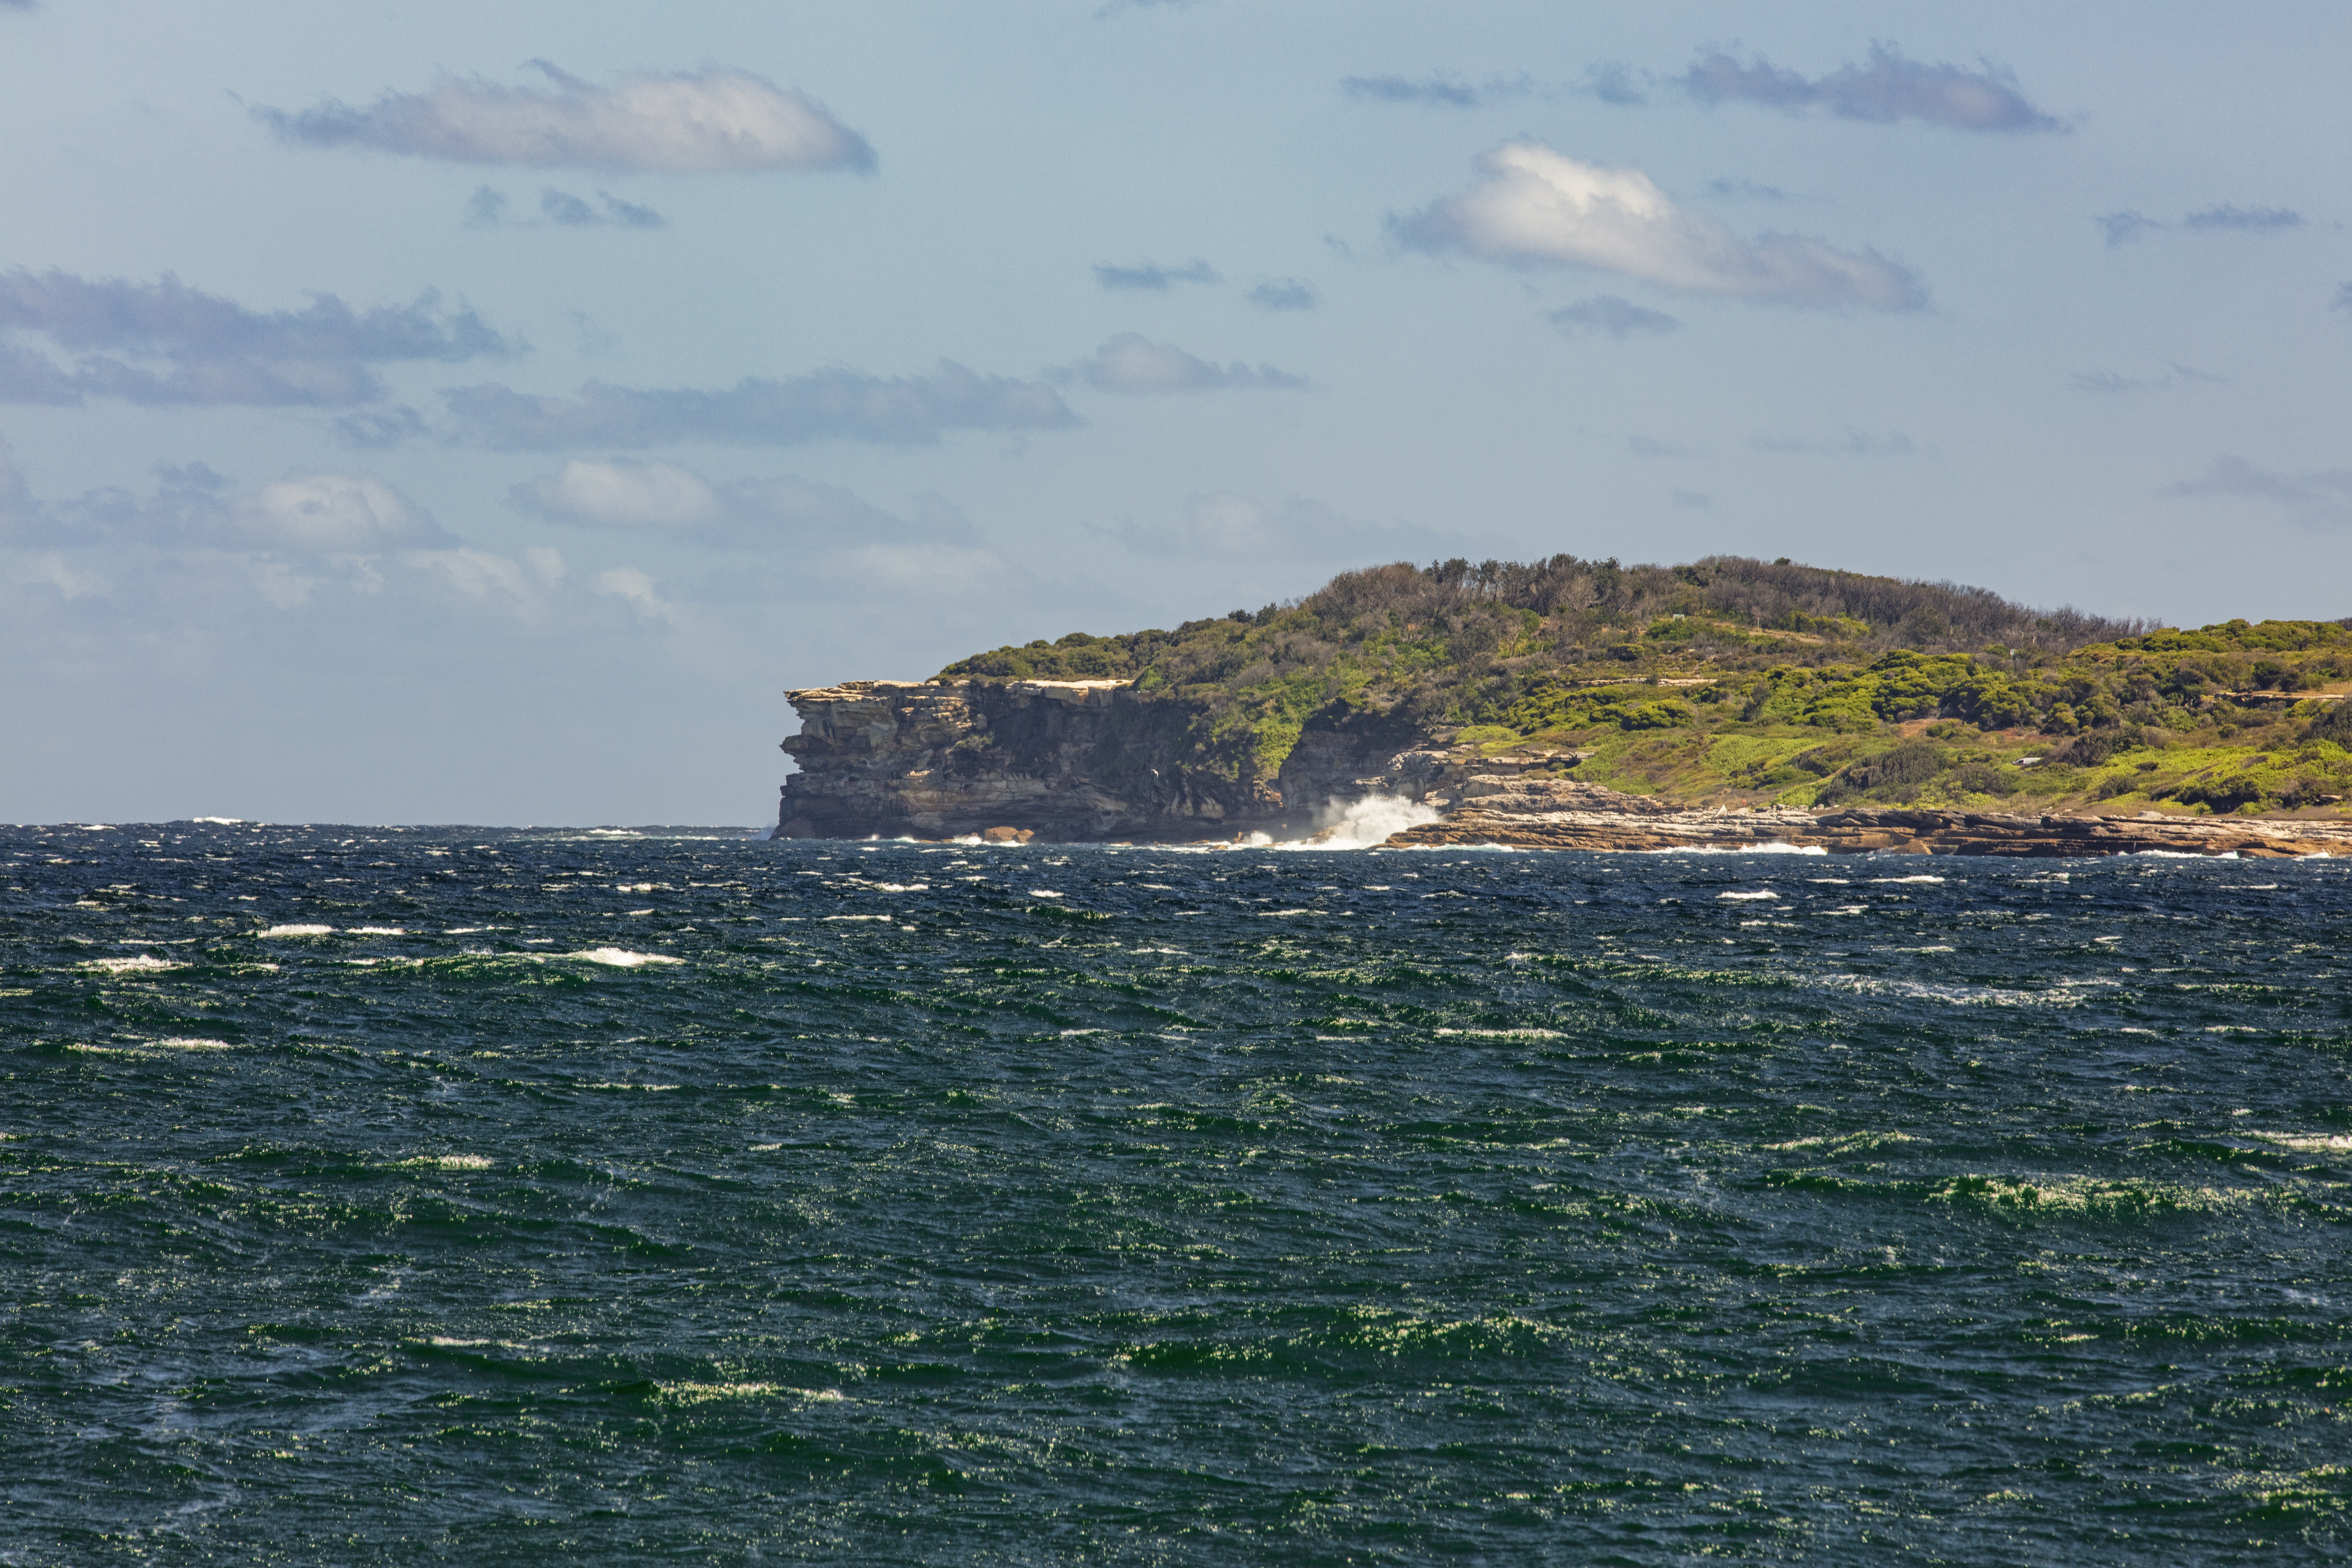 <p>South Head as viewed from Bare Island Fort, Botany Bay, 2019</p>
